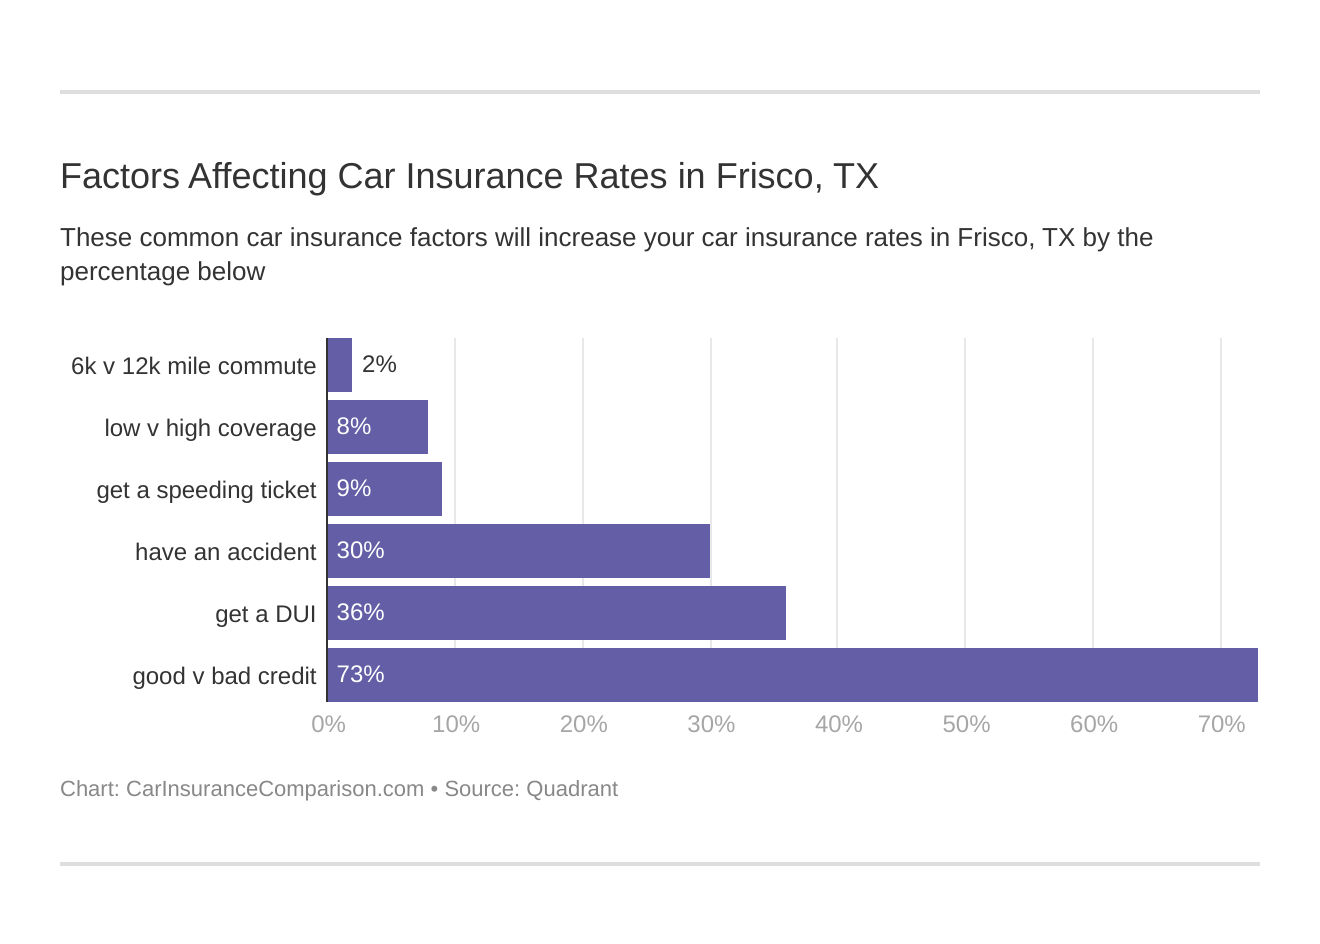 Factors Affecting Car Insurance Rates in Frisco, TX